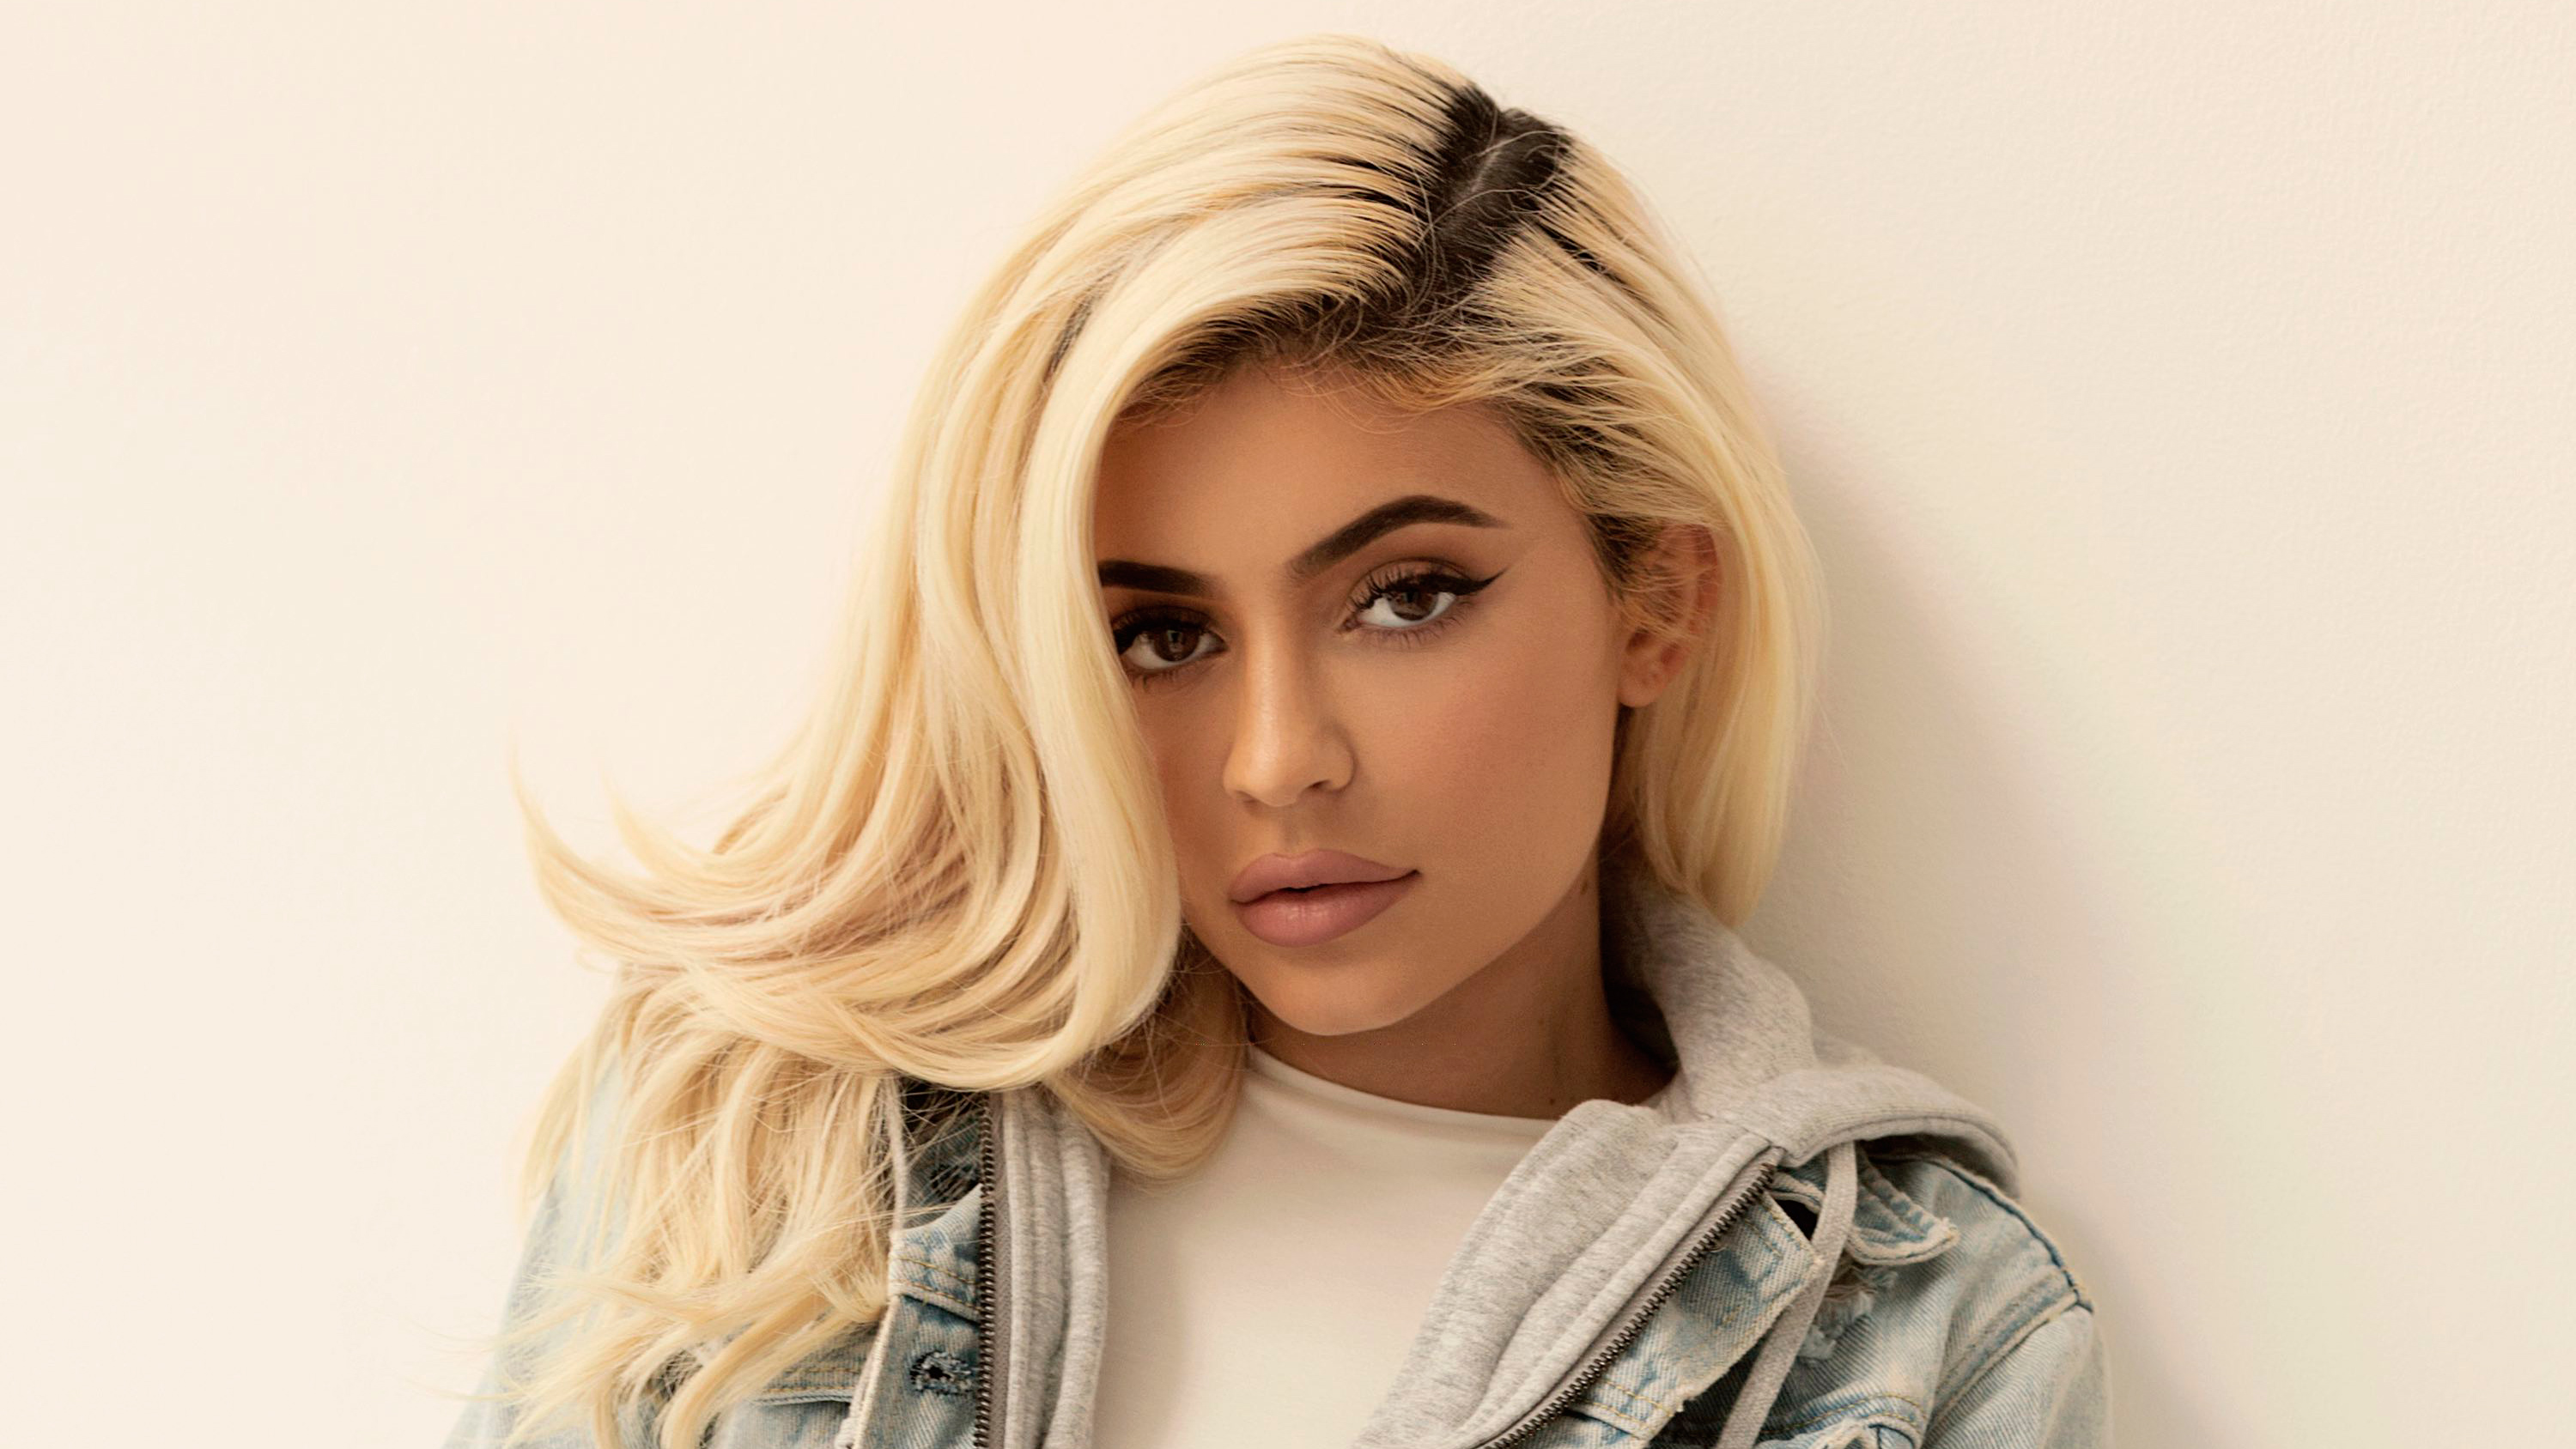 Kylie Jenner 2019 Computer Wallpapers Wallpaper Cave Images, Photos, Reviews